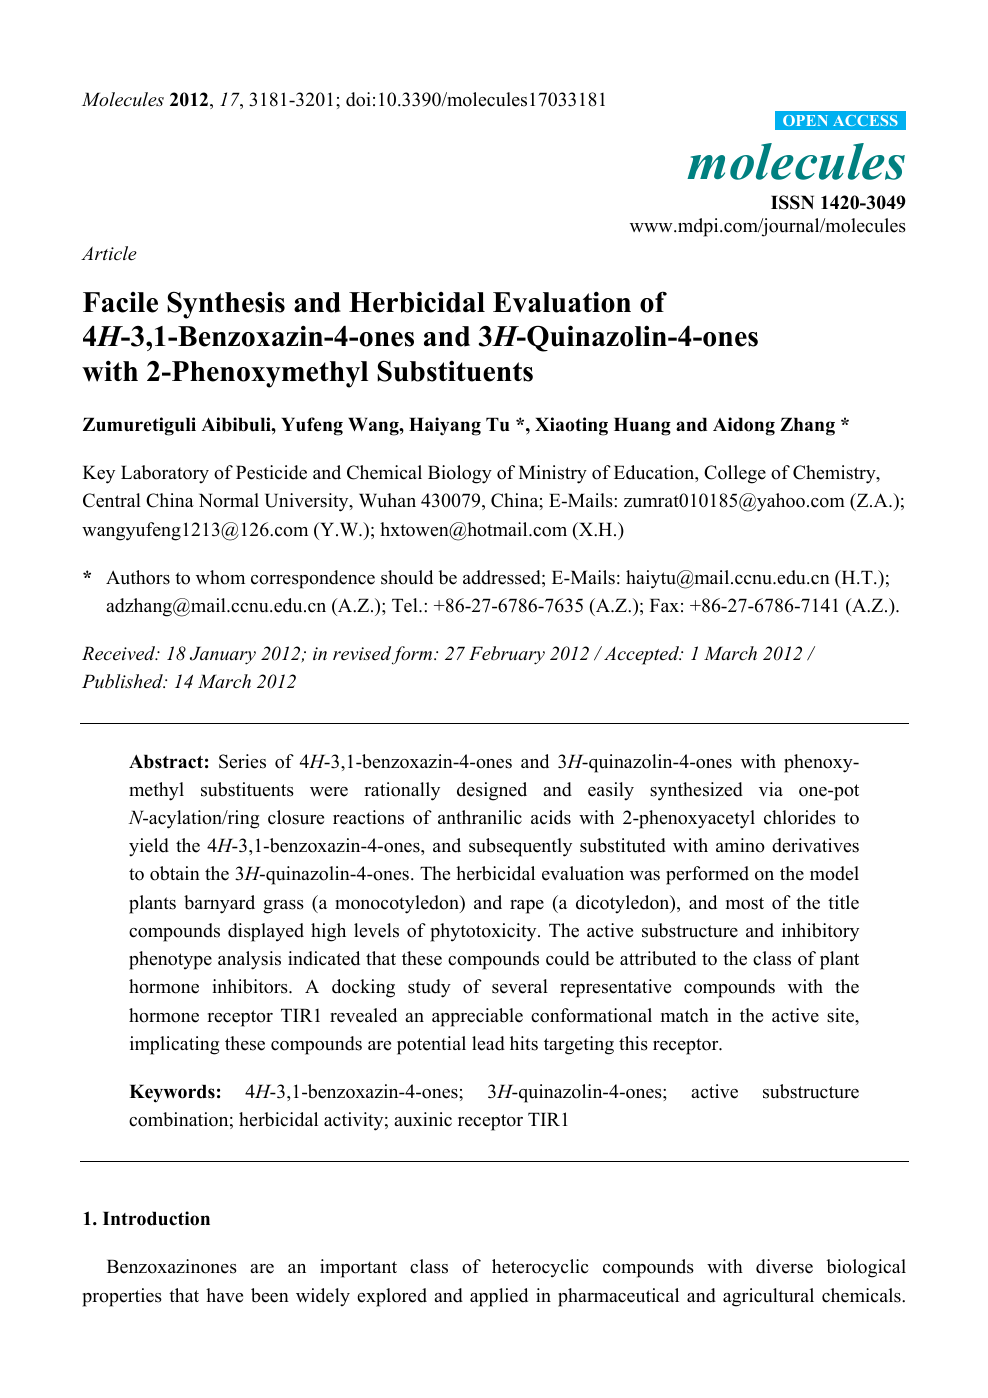 Facile Synthesis And Herbicidal Evaluation Of 4h 3 1 Benzoxazin 4 Ones And 3h Quinazolin 4 Ones With 2 Phenoxymethyl Substituents Topic Of Research Paper In Chemical Sciences Download Scholarly Article Pdf And Read For Free On Cyberleninka Open Science